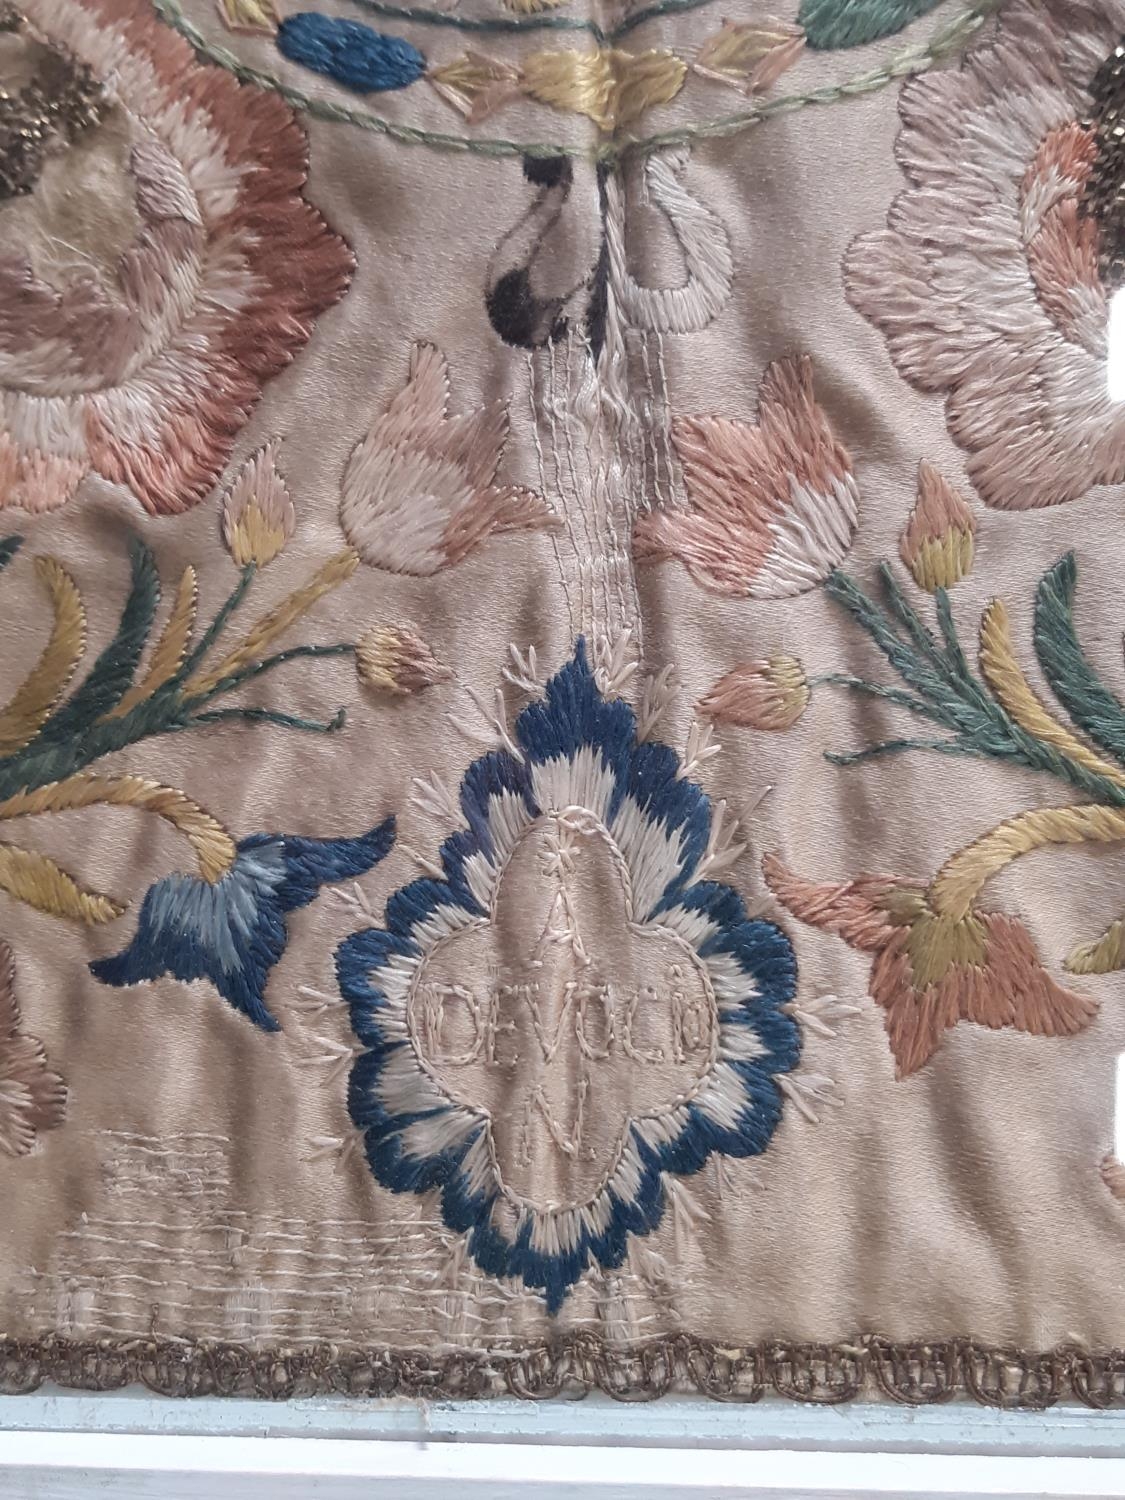 18th century Spanish embroidered silk panel with a floral design in satin stich arranged in - Image 5 of 6